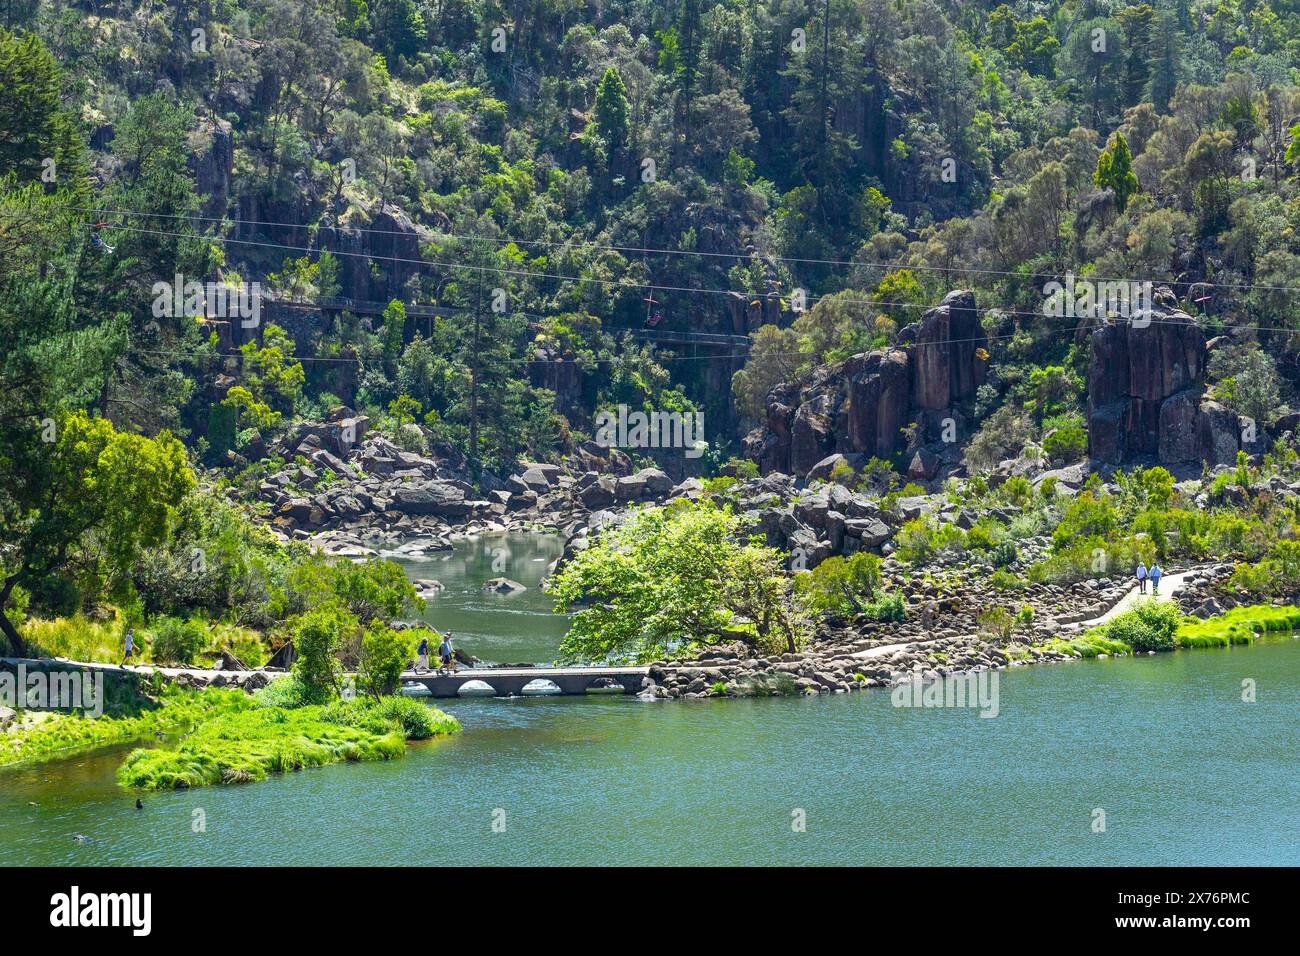 First Basin and the South Esk River in Cataract Gorge in Launceston, Tasmania, Australia, seen from the Alexandra Suspension Bridge. The park contains Stock Photo